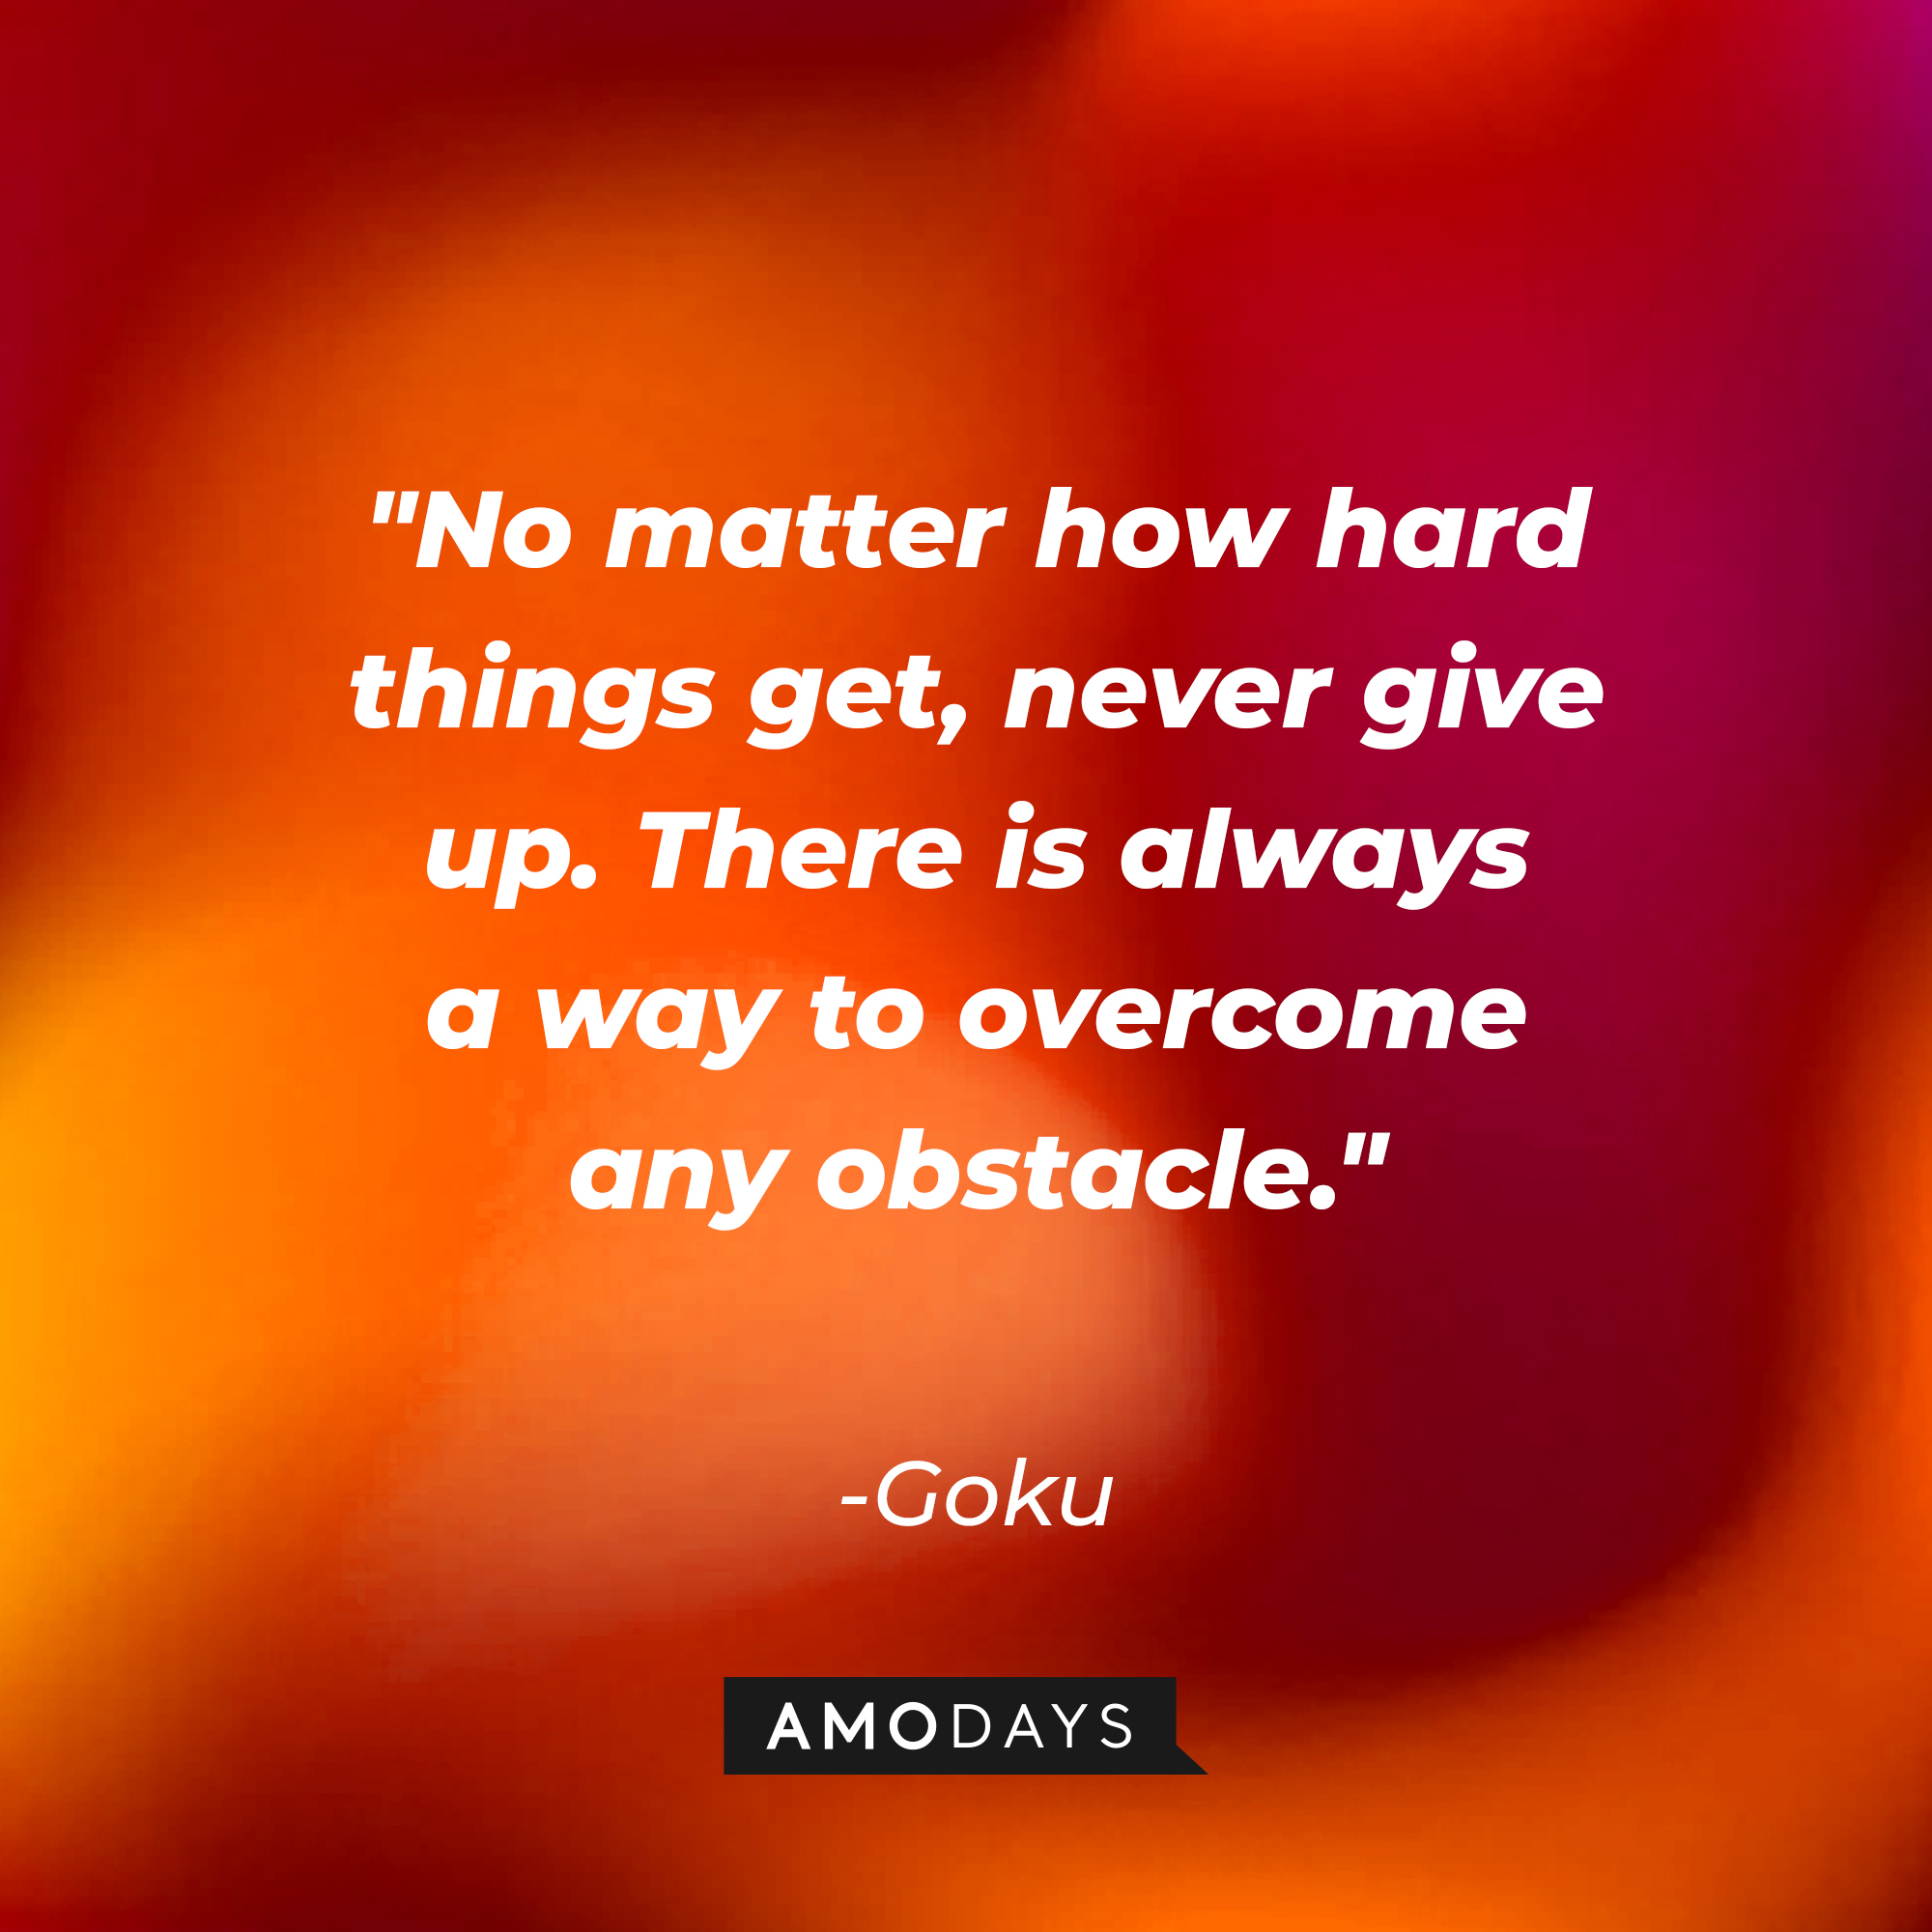 Goku's quote: "No matter how hard things get, never give up. There is always a way to overcome any obstacle." | Source: youtube.com/DragonballBlack